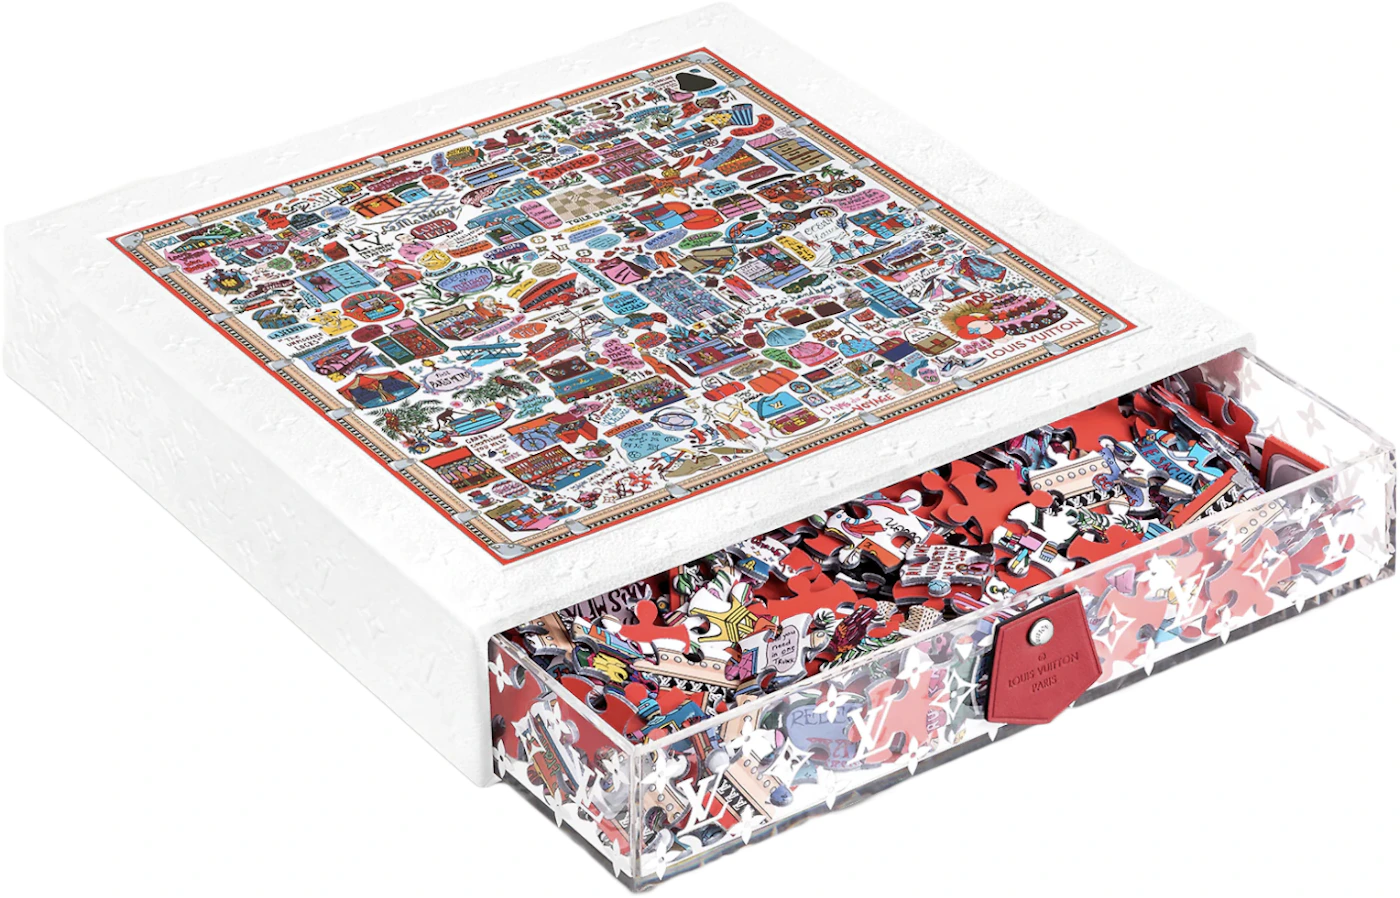 Louis Vuitton 200 Year Anniversey Jigsaw Puzzle GI0638 (529 Pieces) Multi